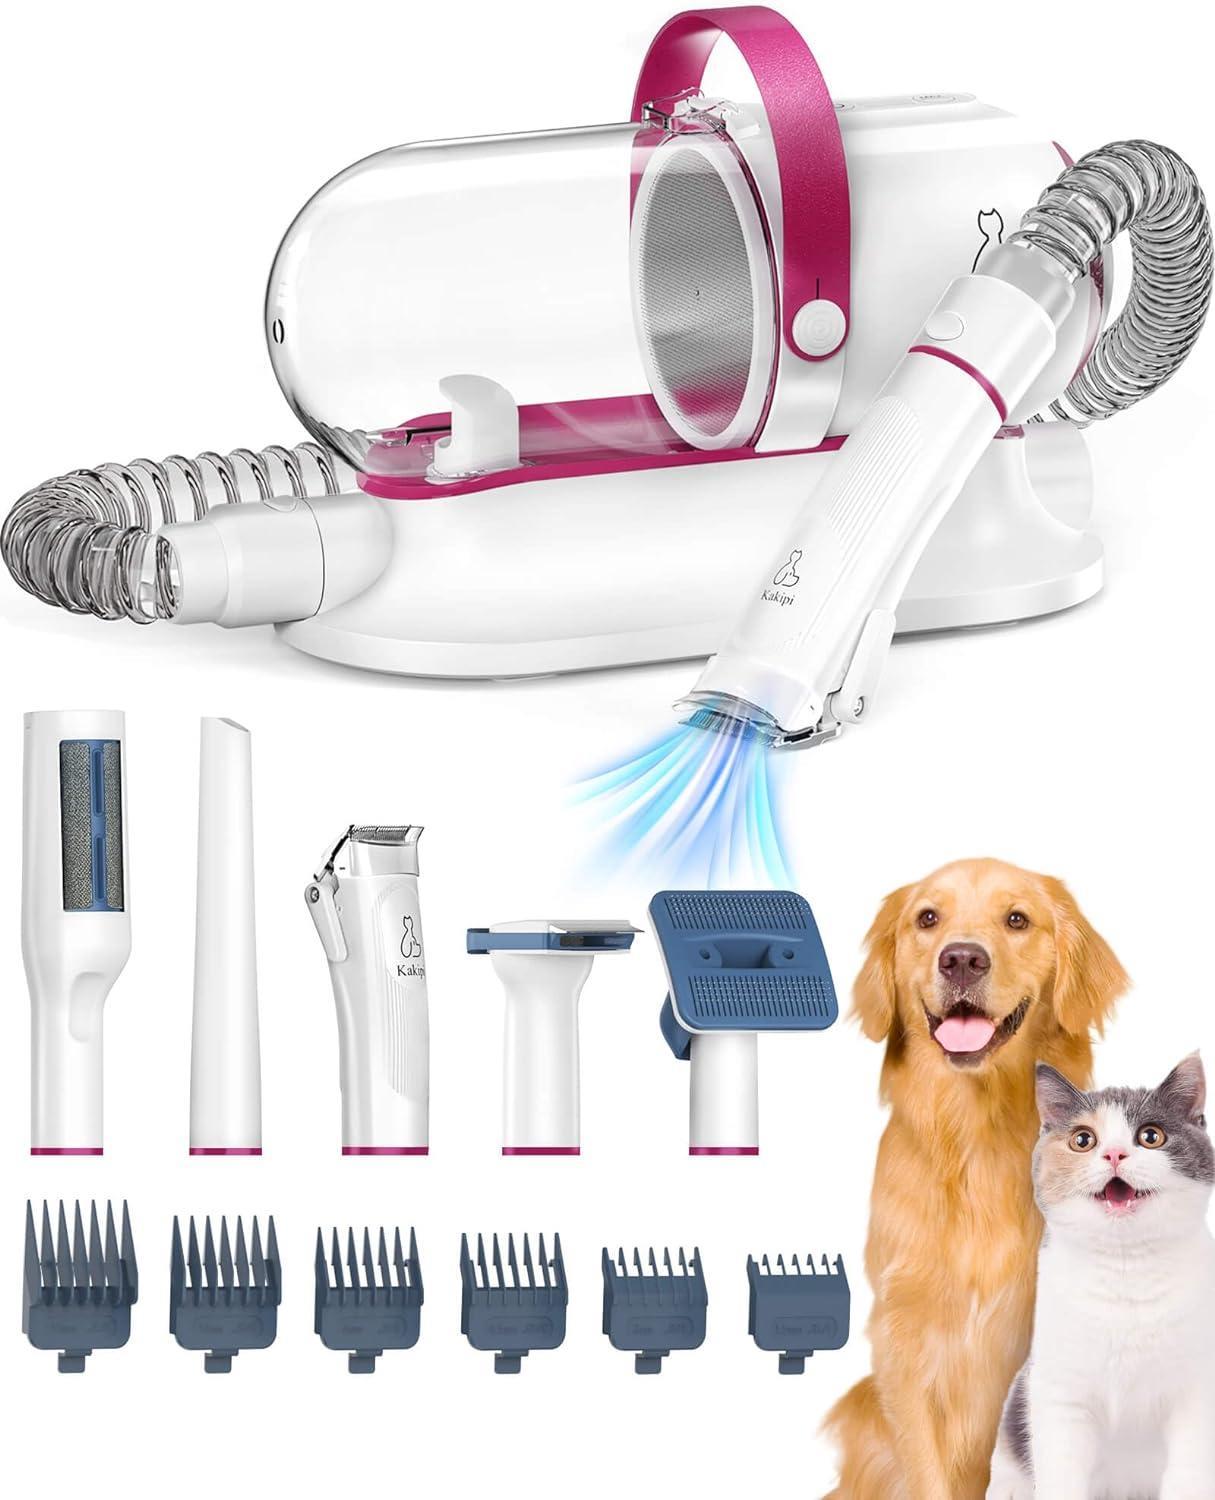 Dog Grooming Kit&Vacuum,6in1 Pet Grooming Vacuum with Shedding Brush,Dog Clippers,Dog Dryer,Cleaner,1.5L Dust Cup Pet Grooming Kit ,2 Filters